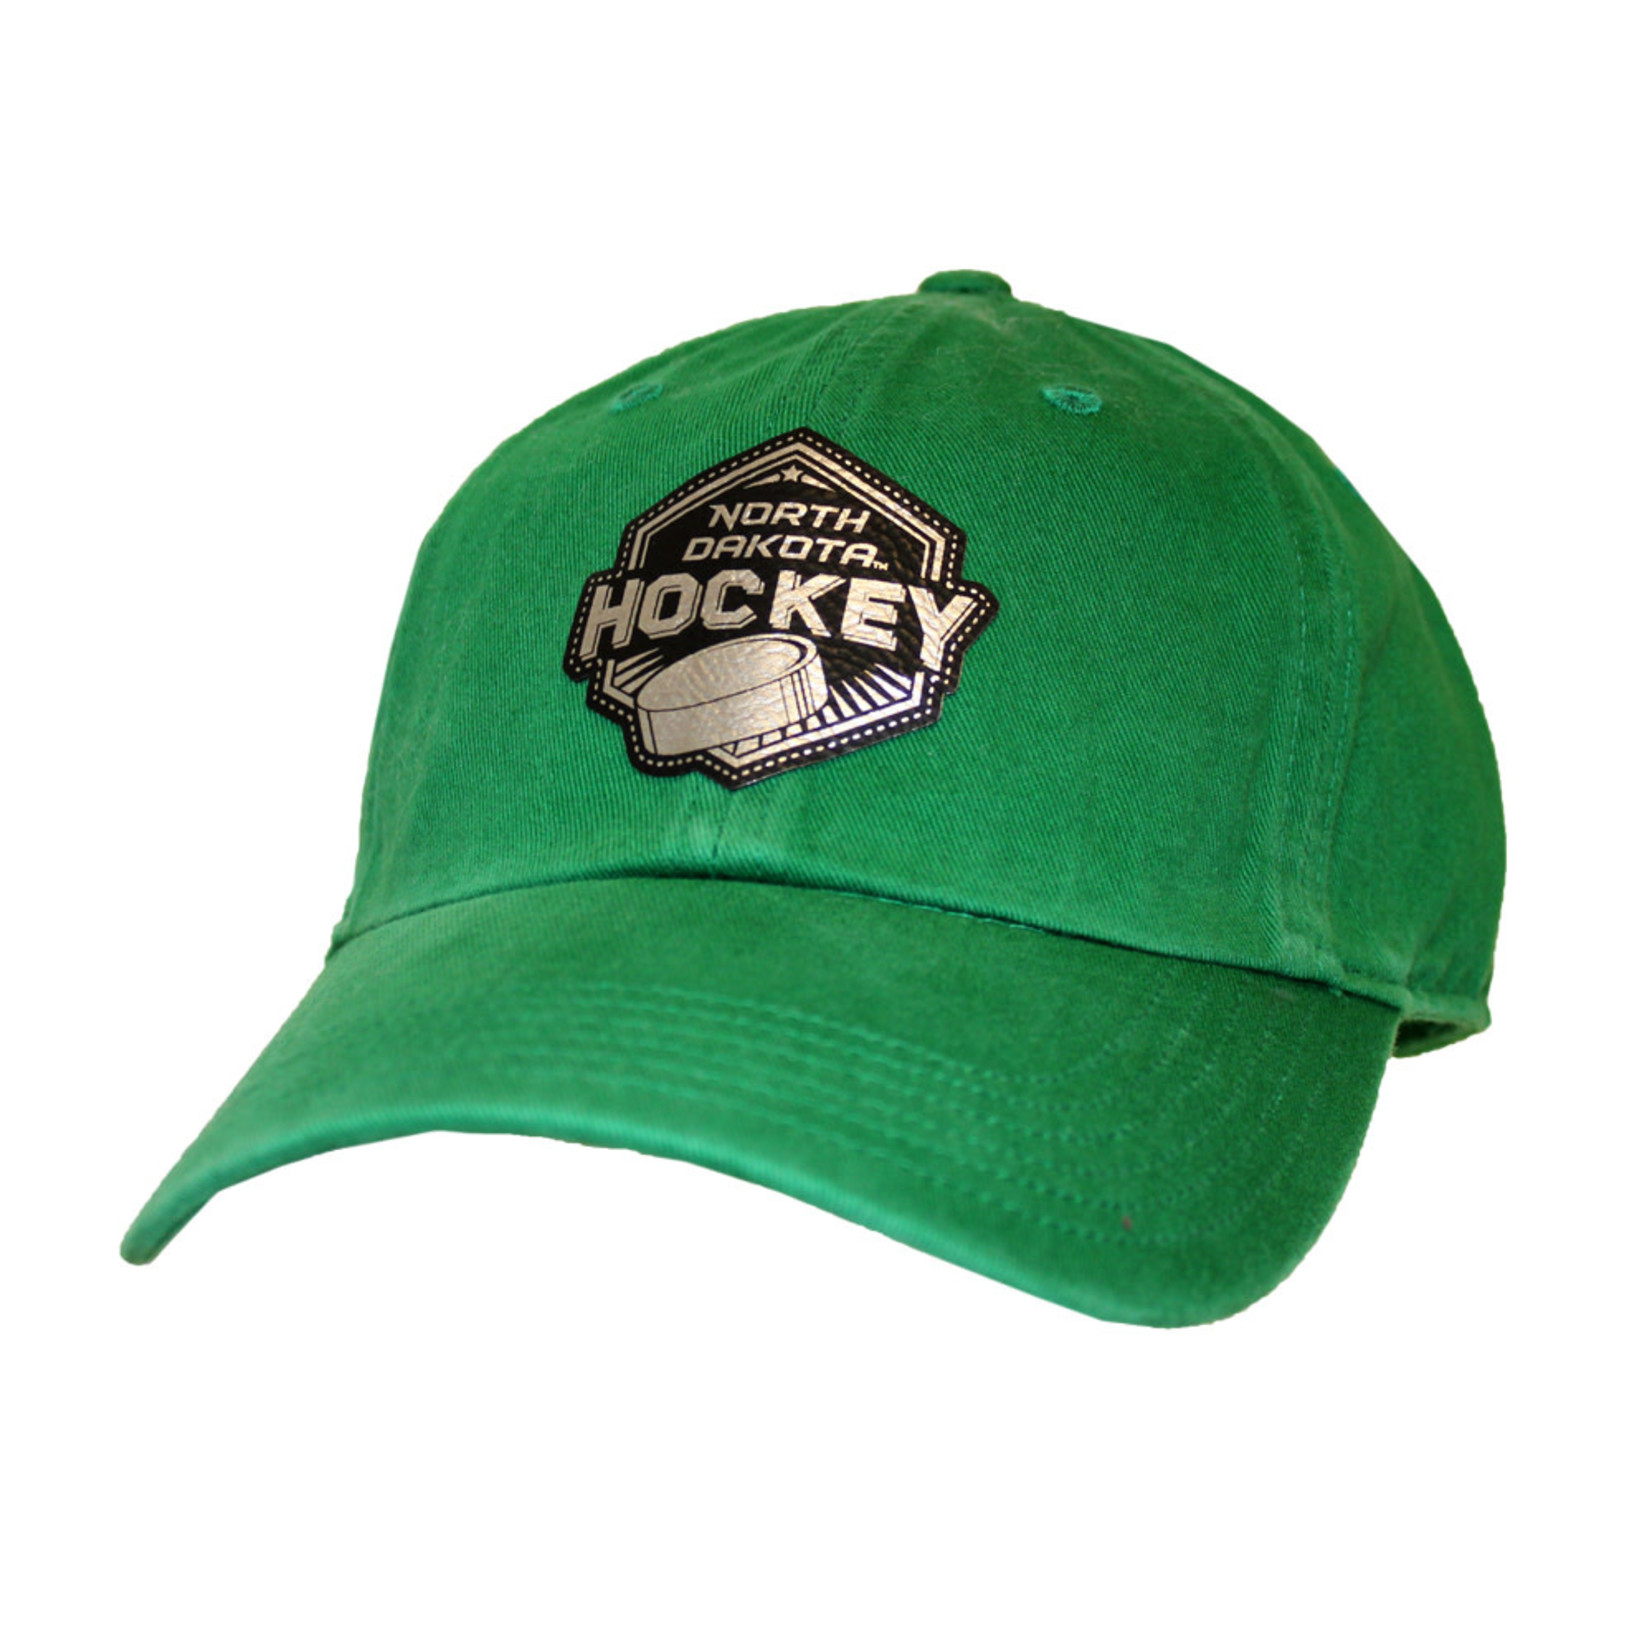 Richardson ND Hockey Mitts Leather Patch Kelly Slouch Cap